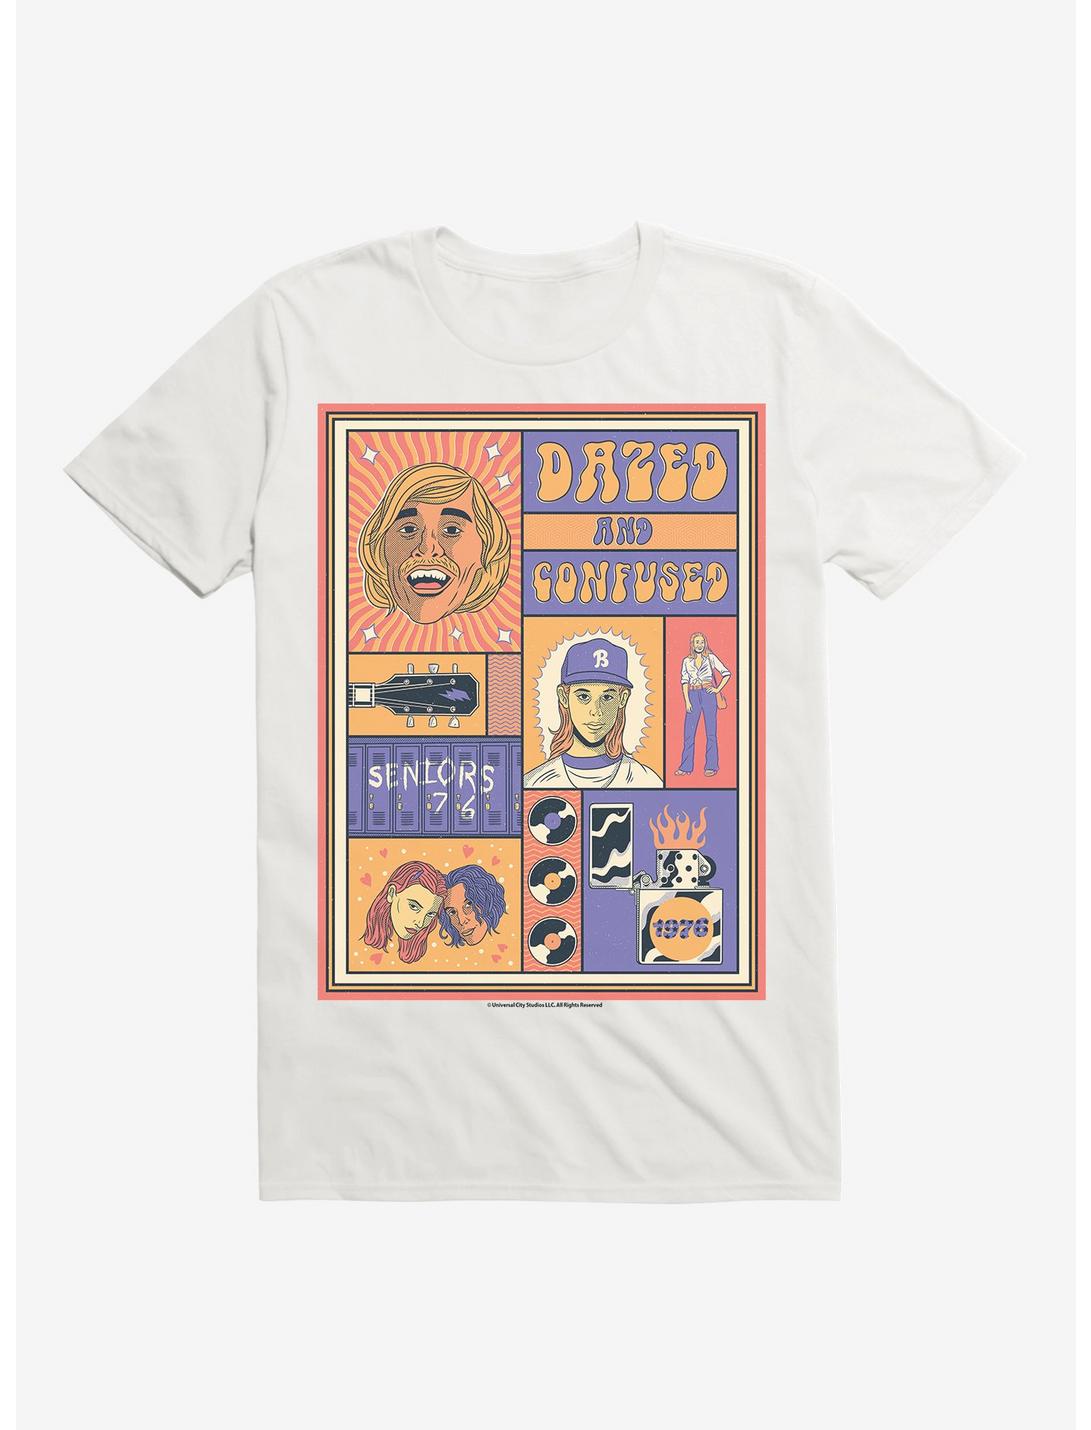 Dazed and Confused Collage T-Shirt, WHITE, hi-res